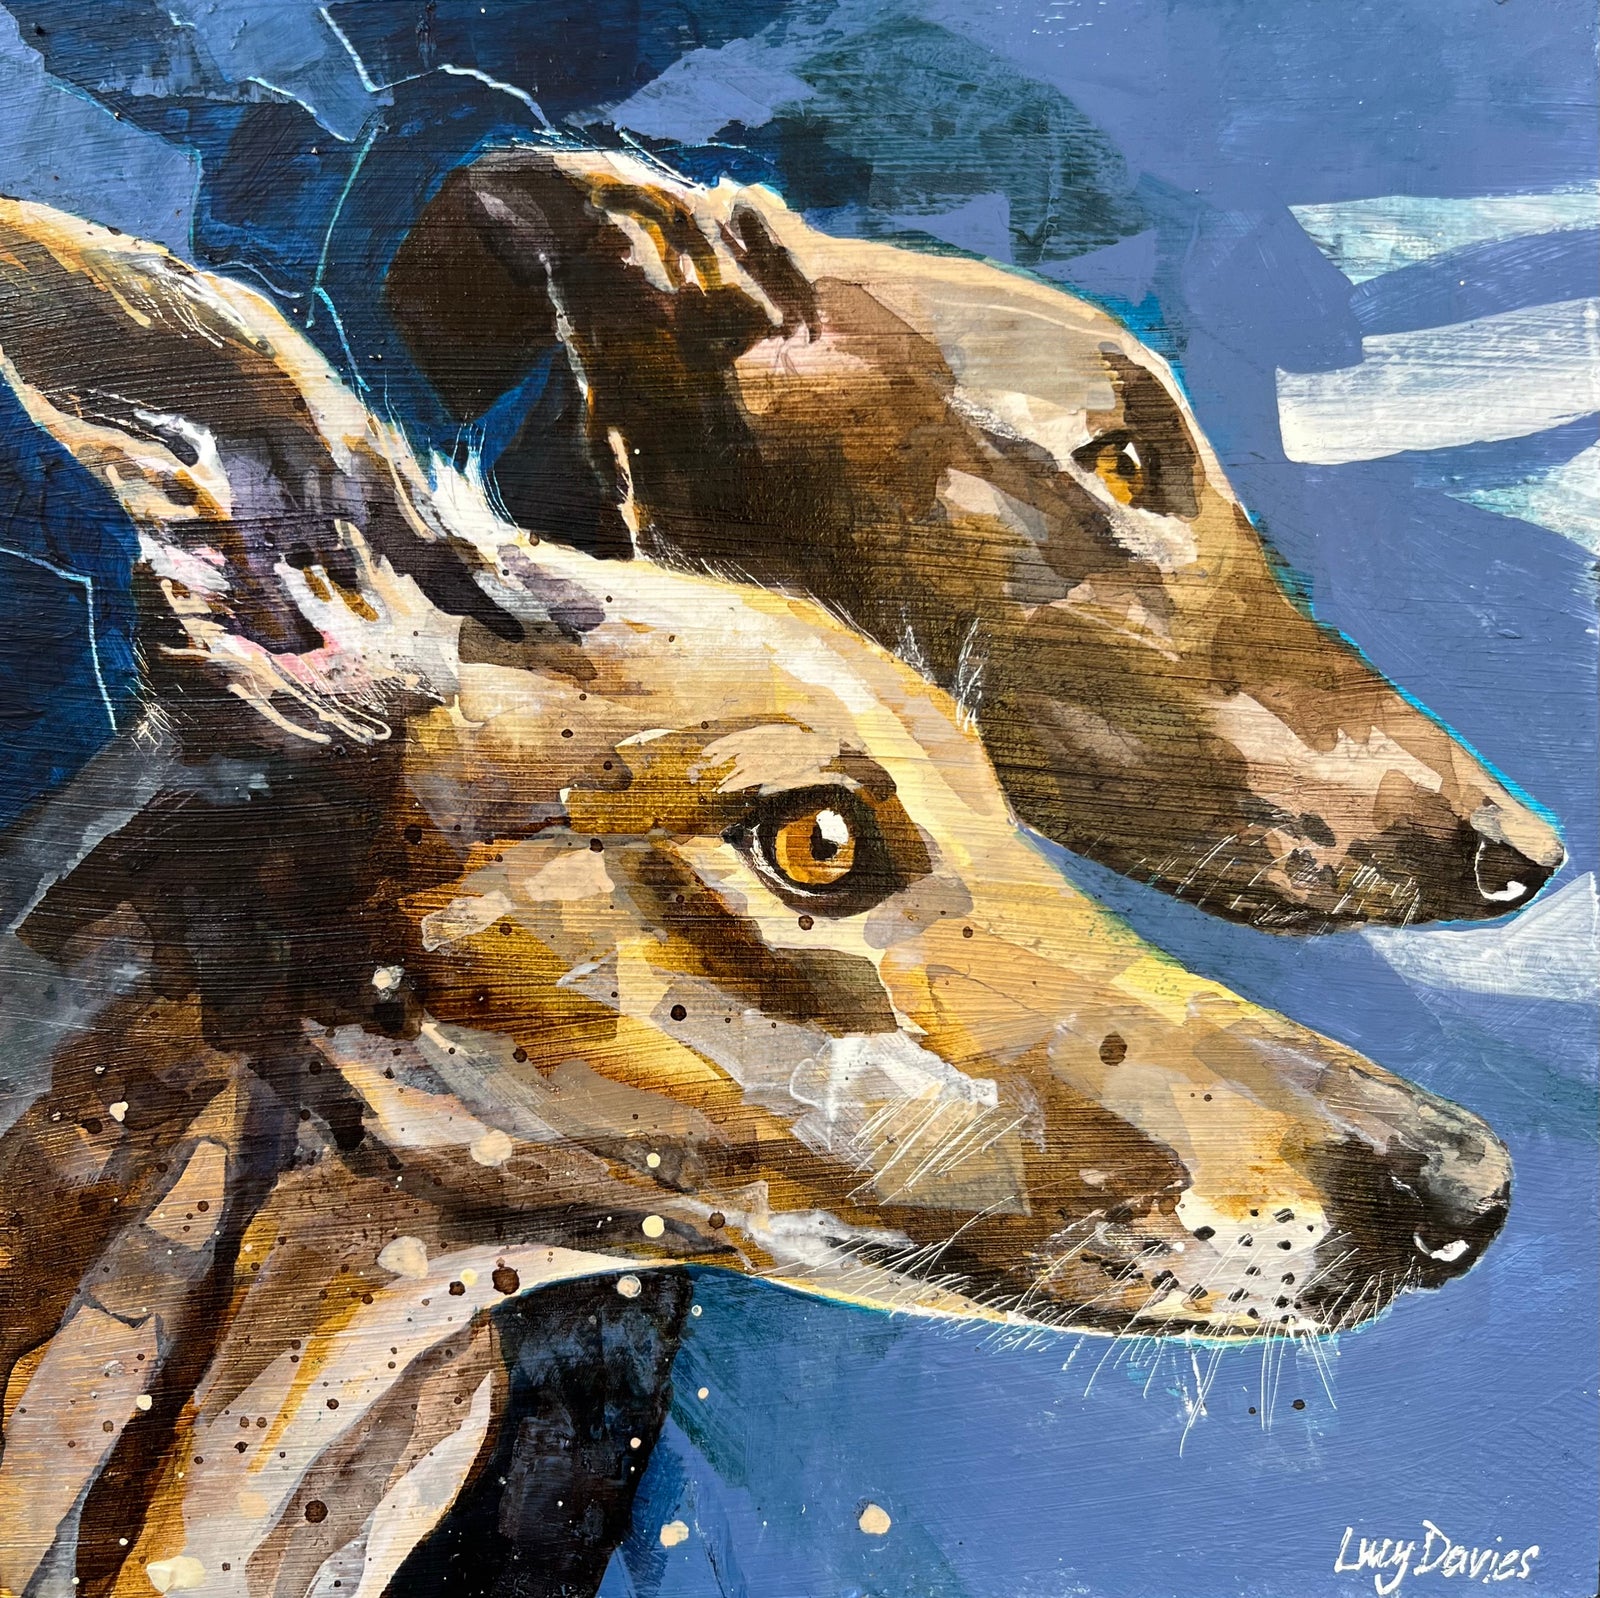 Burt and Bran by Lucy Davies available at Padstow Gallery, Cornwall